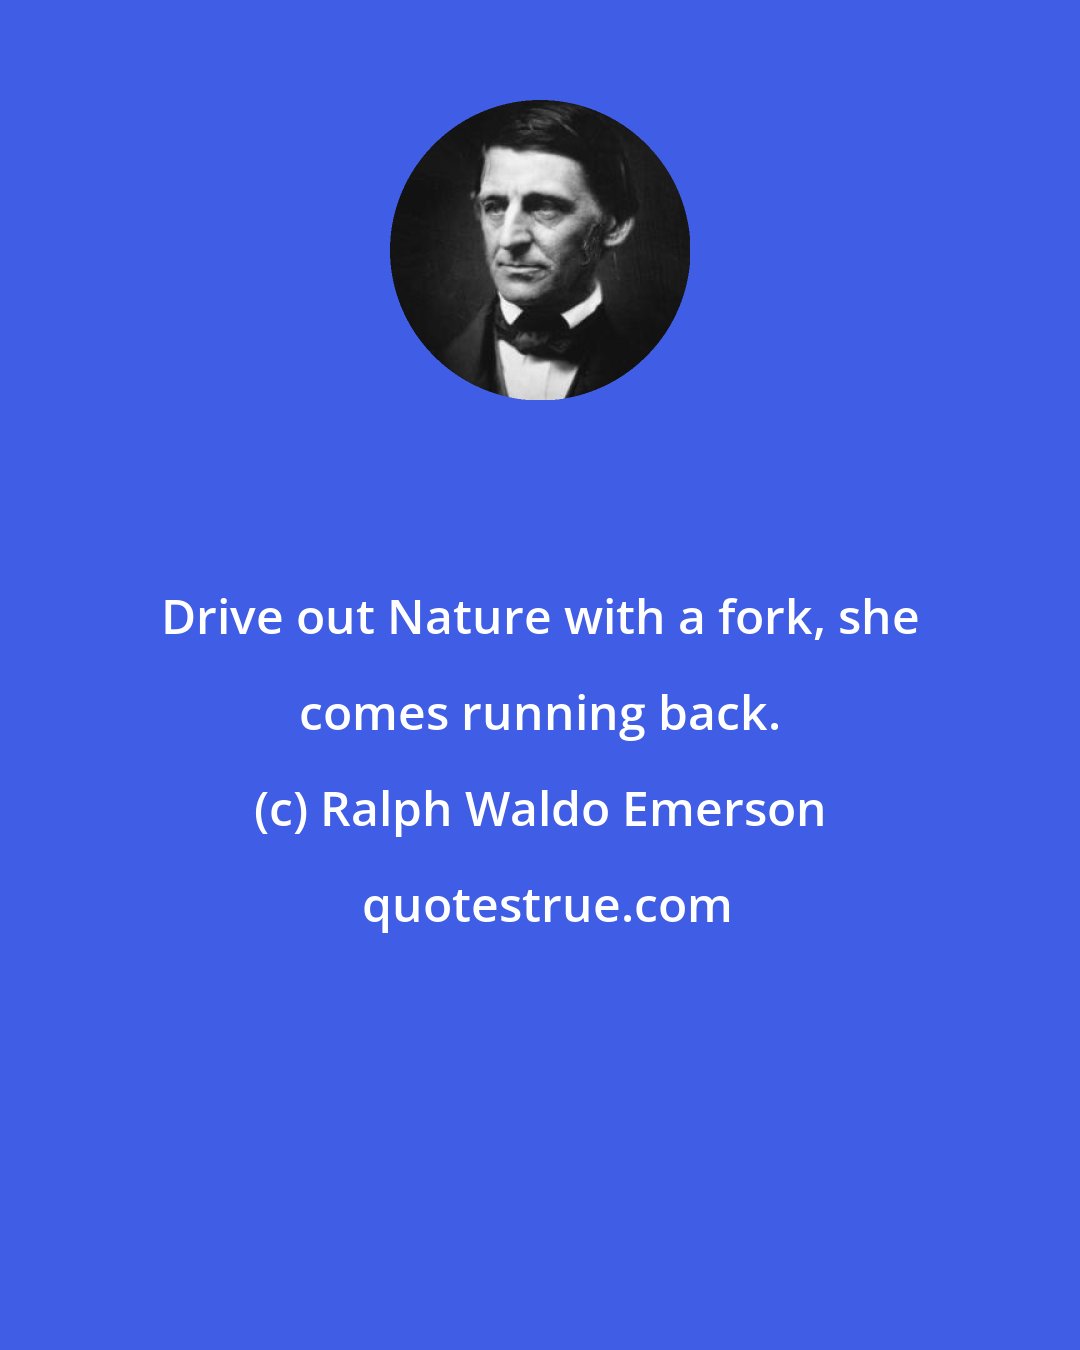 Ralph Waldo Emerson: Drive out Nature with a fork, she comes running back.